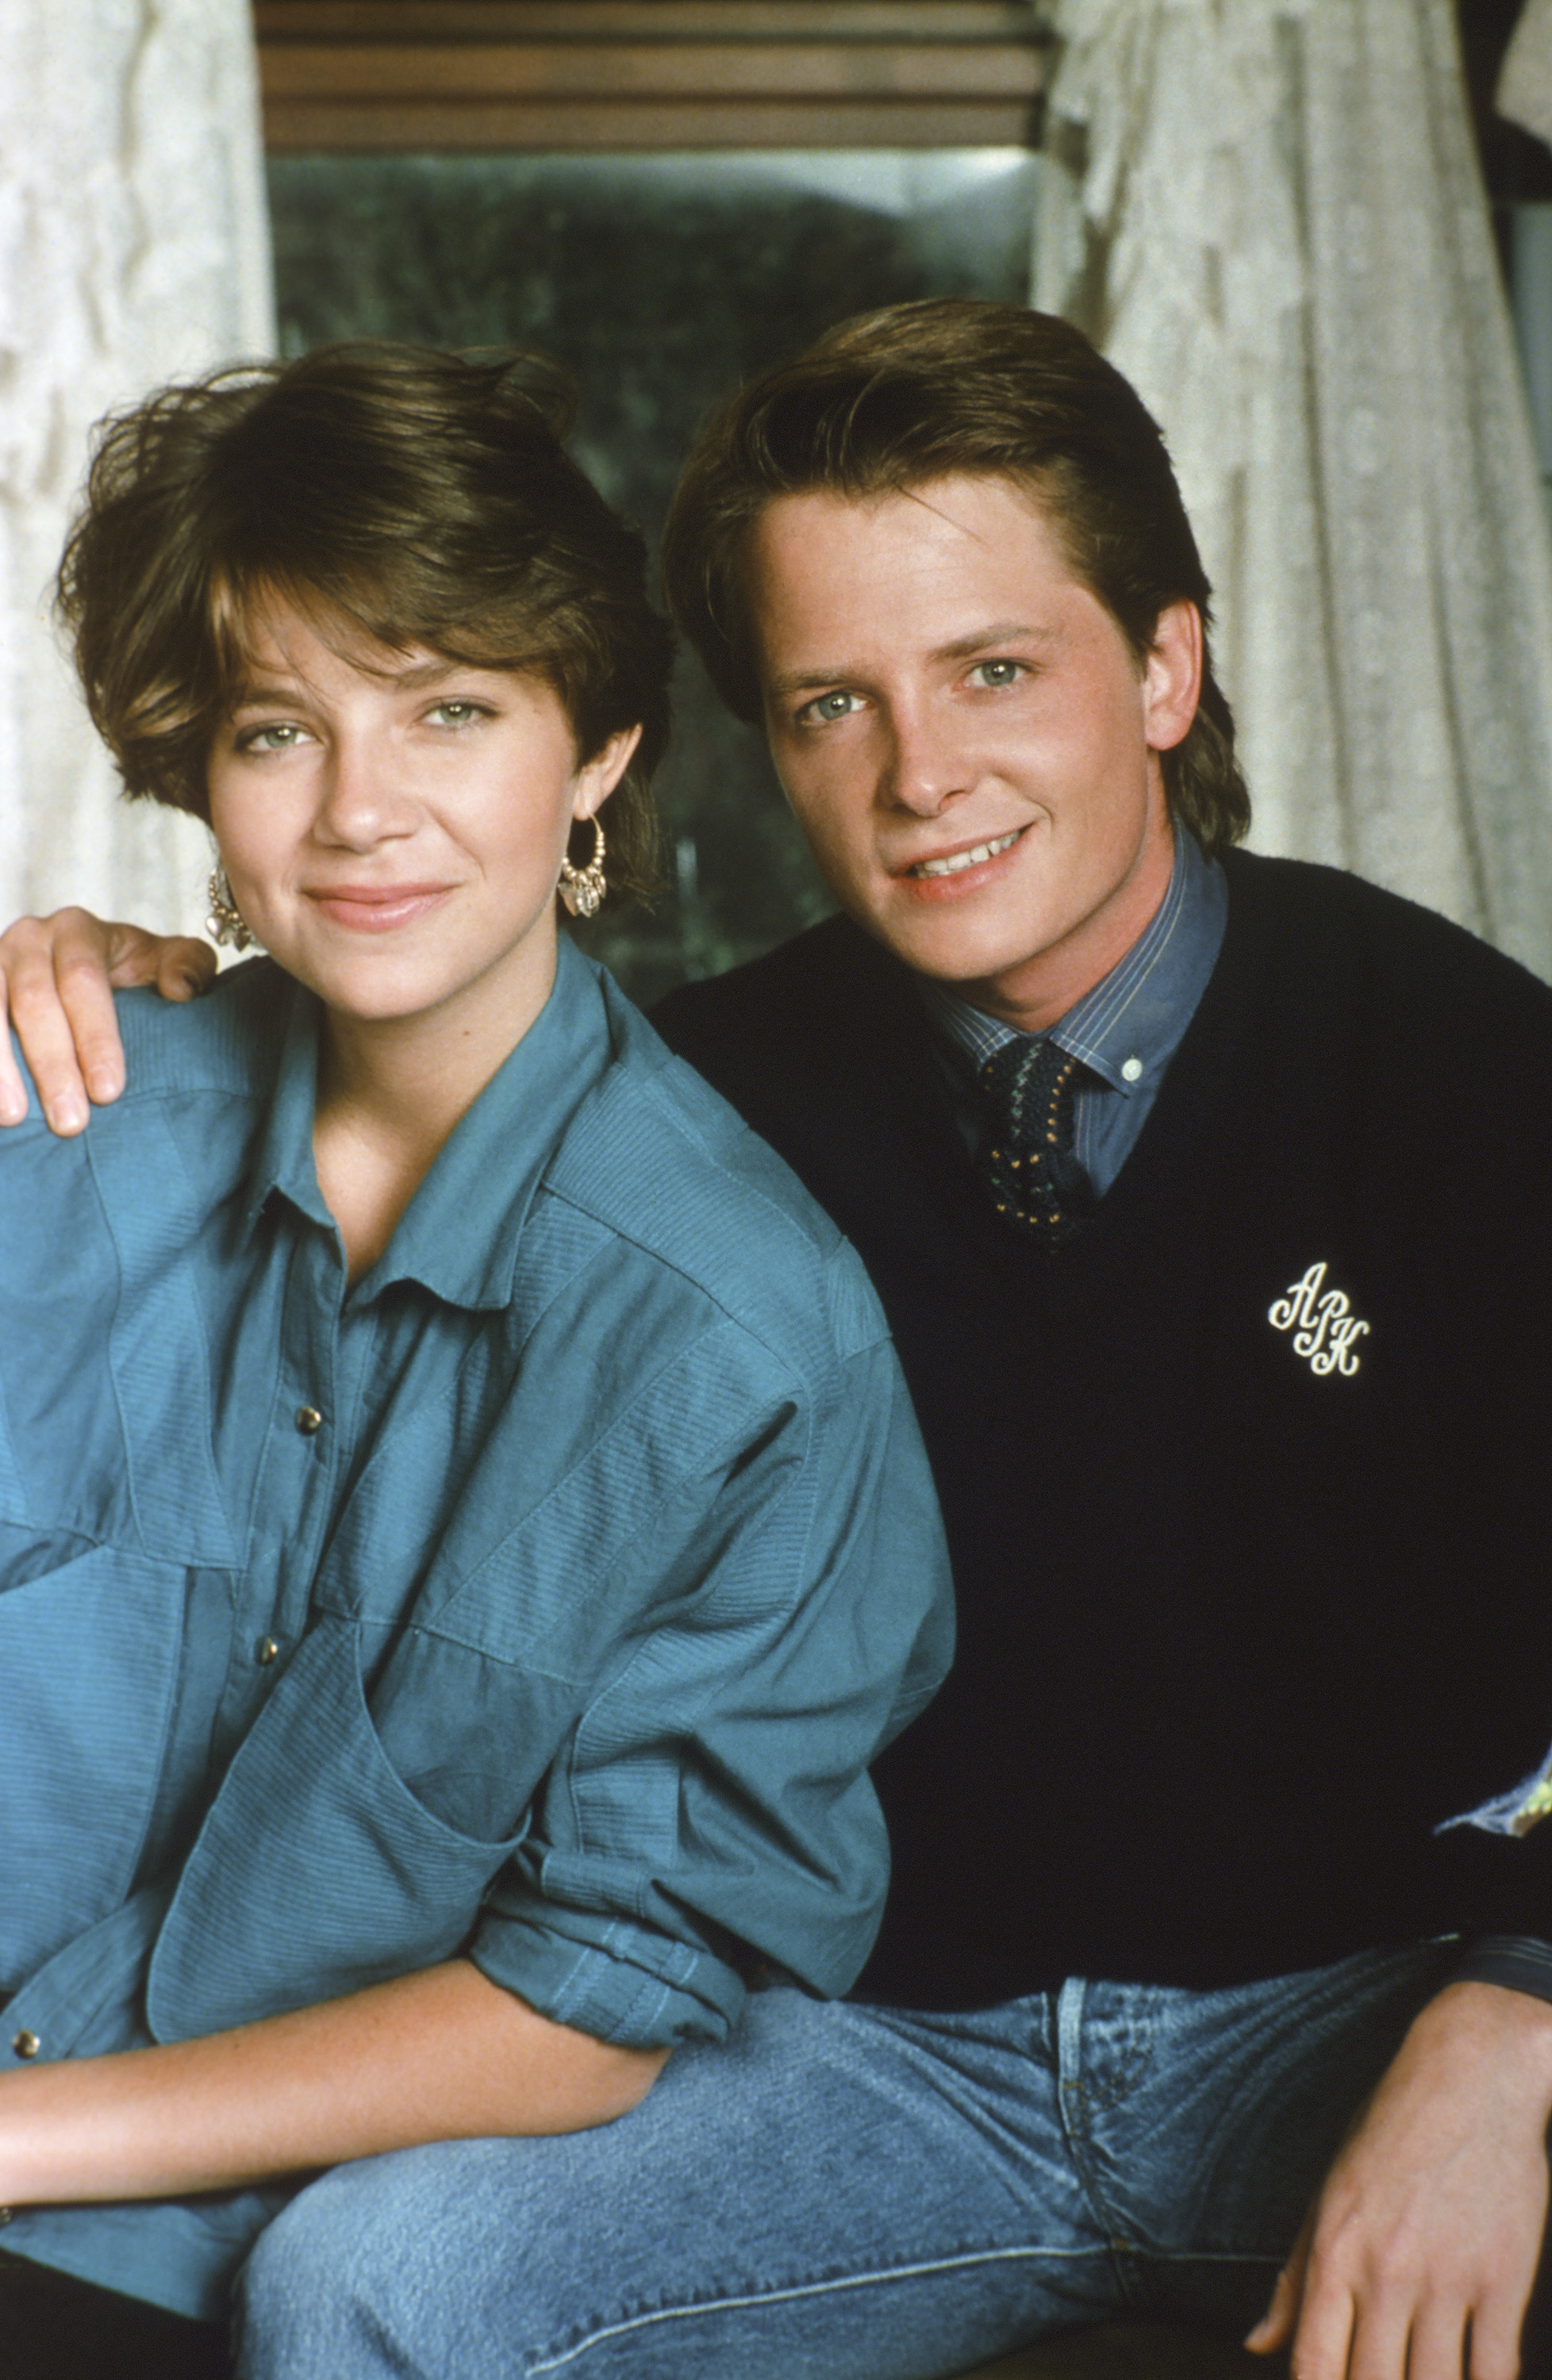 Justine Bateman and Michael J. Fox in "Family Ties," 1985 | Source: Getty Images